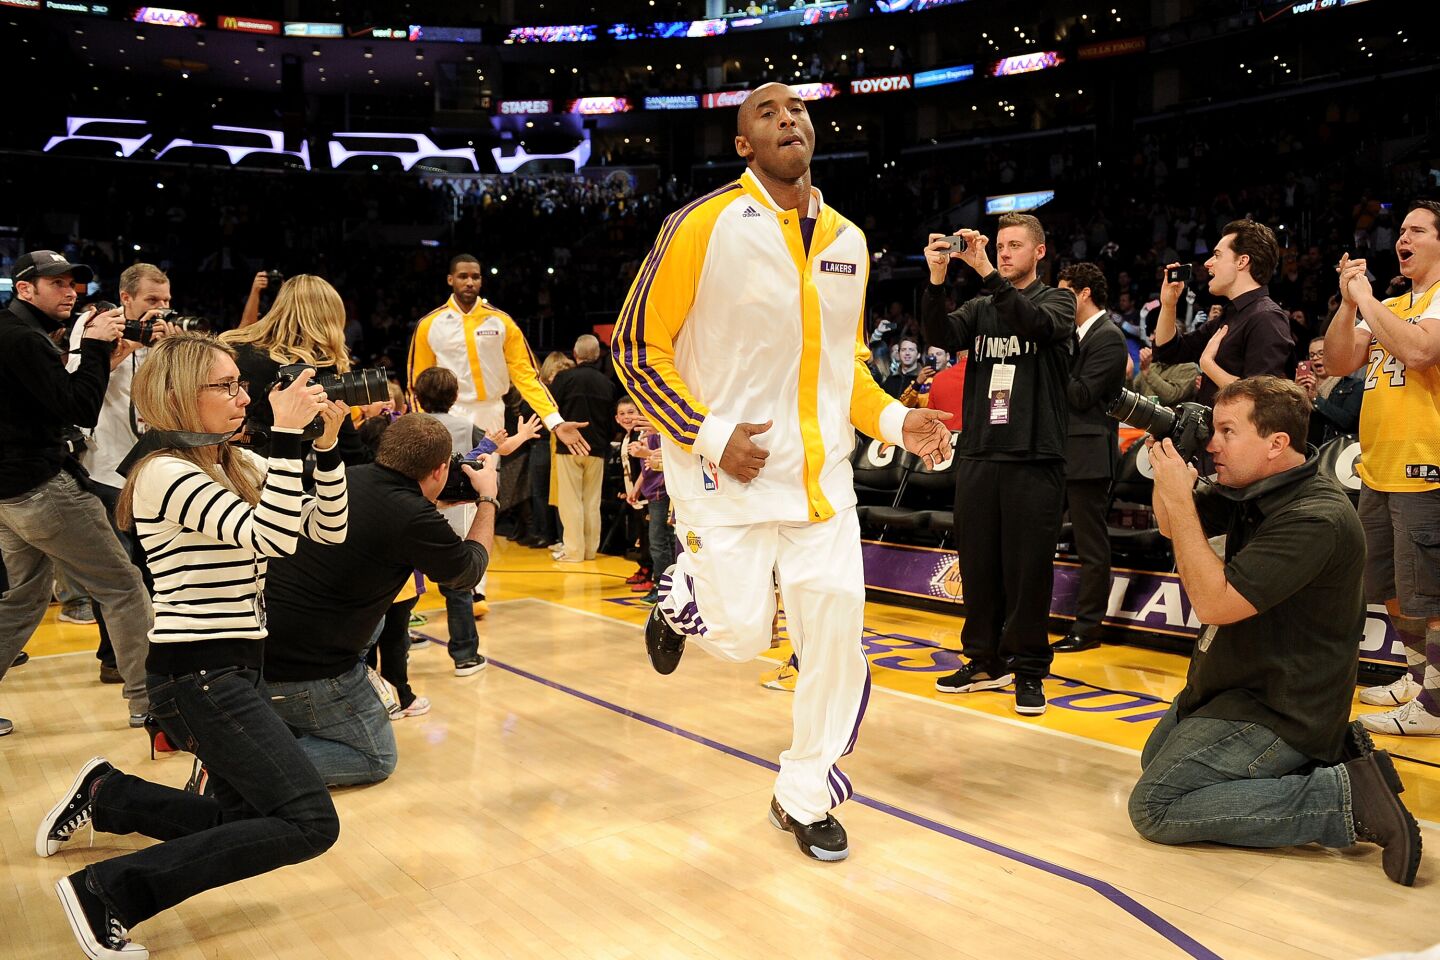 Kobe Bryant warms up during his first game after tearing his Achilles.